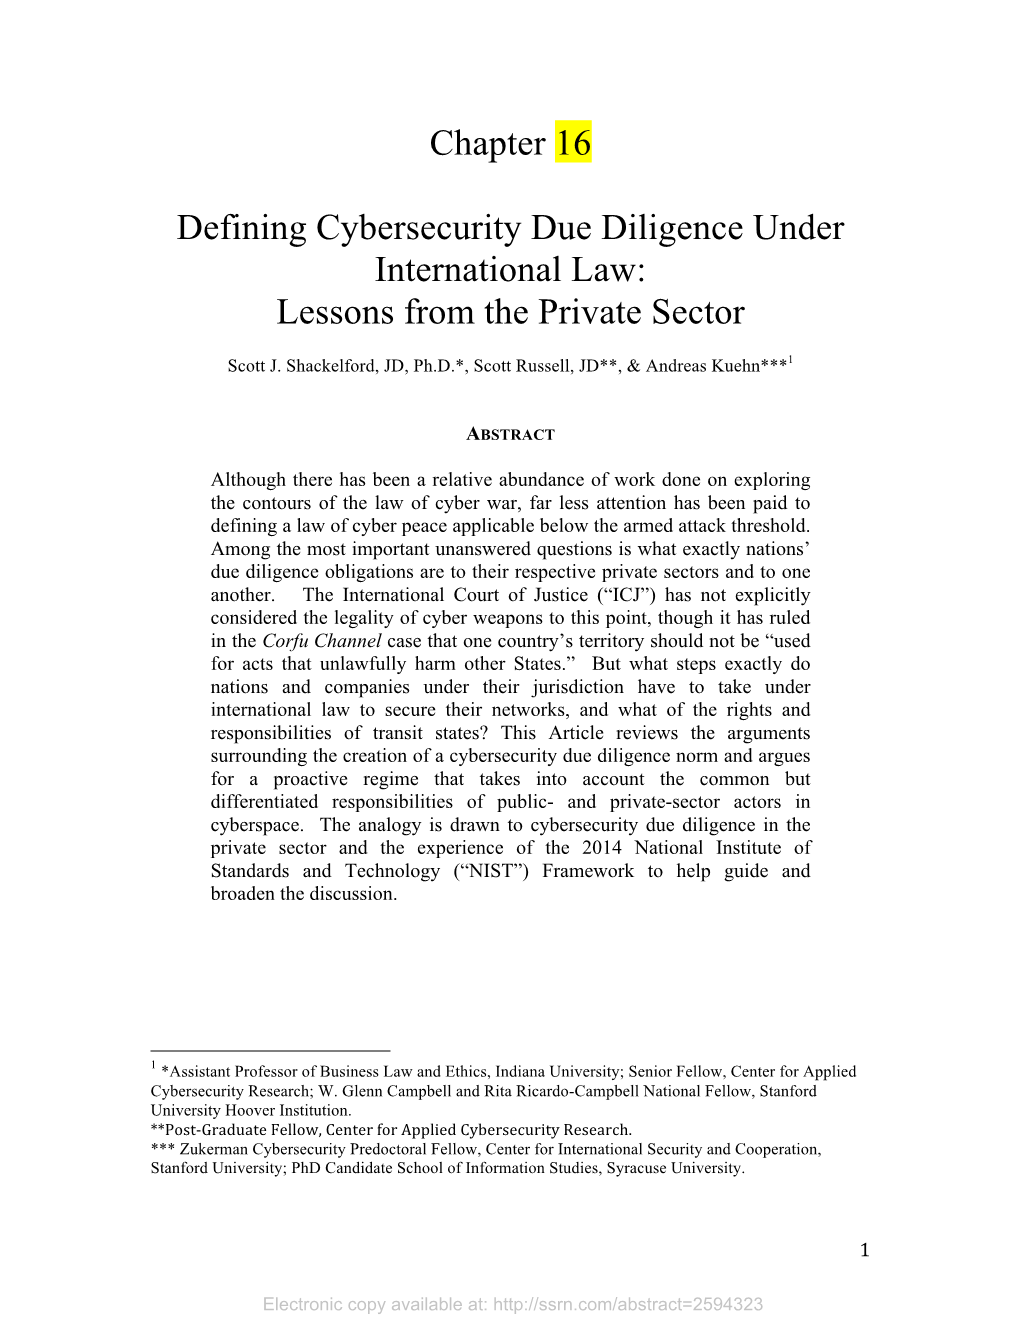 Chapter 16 Defining Cybersecurity